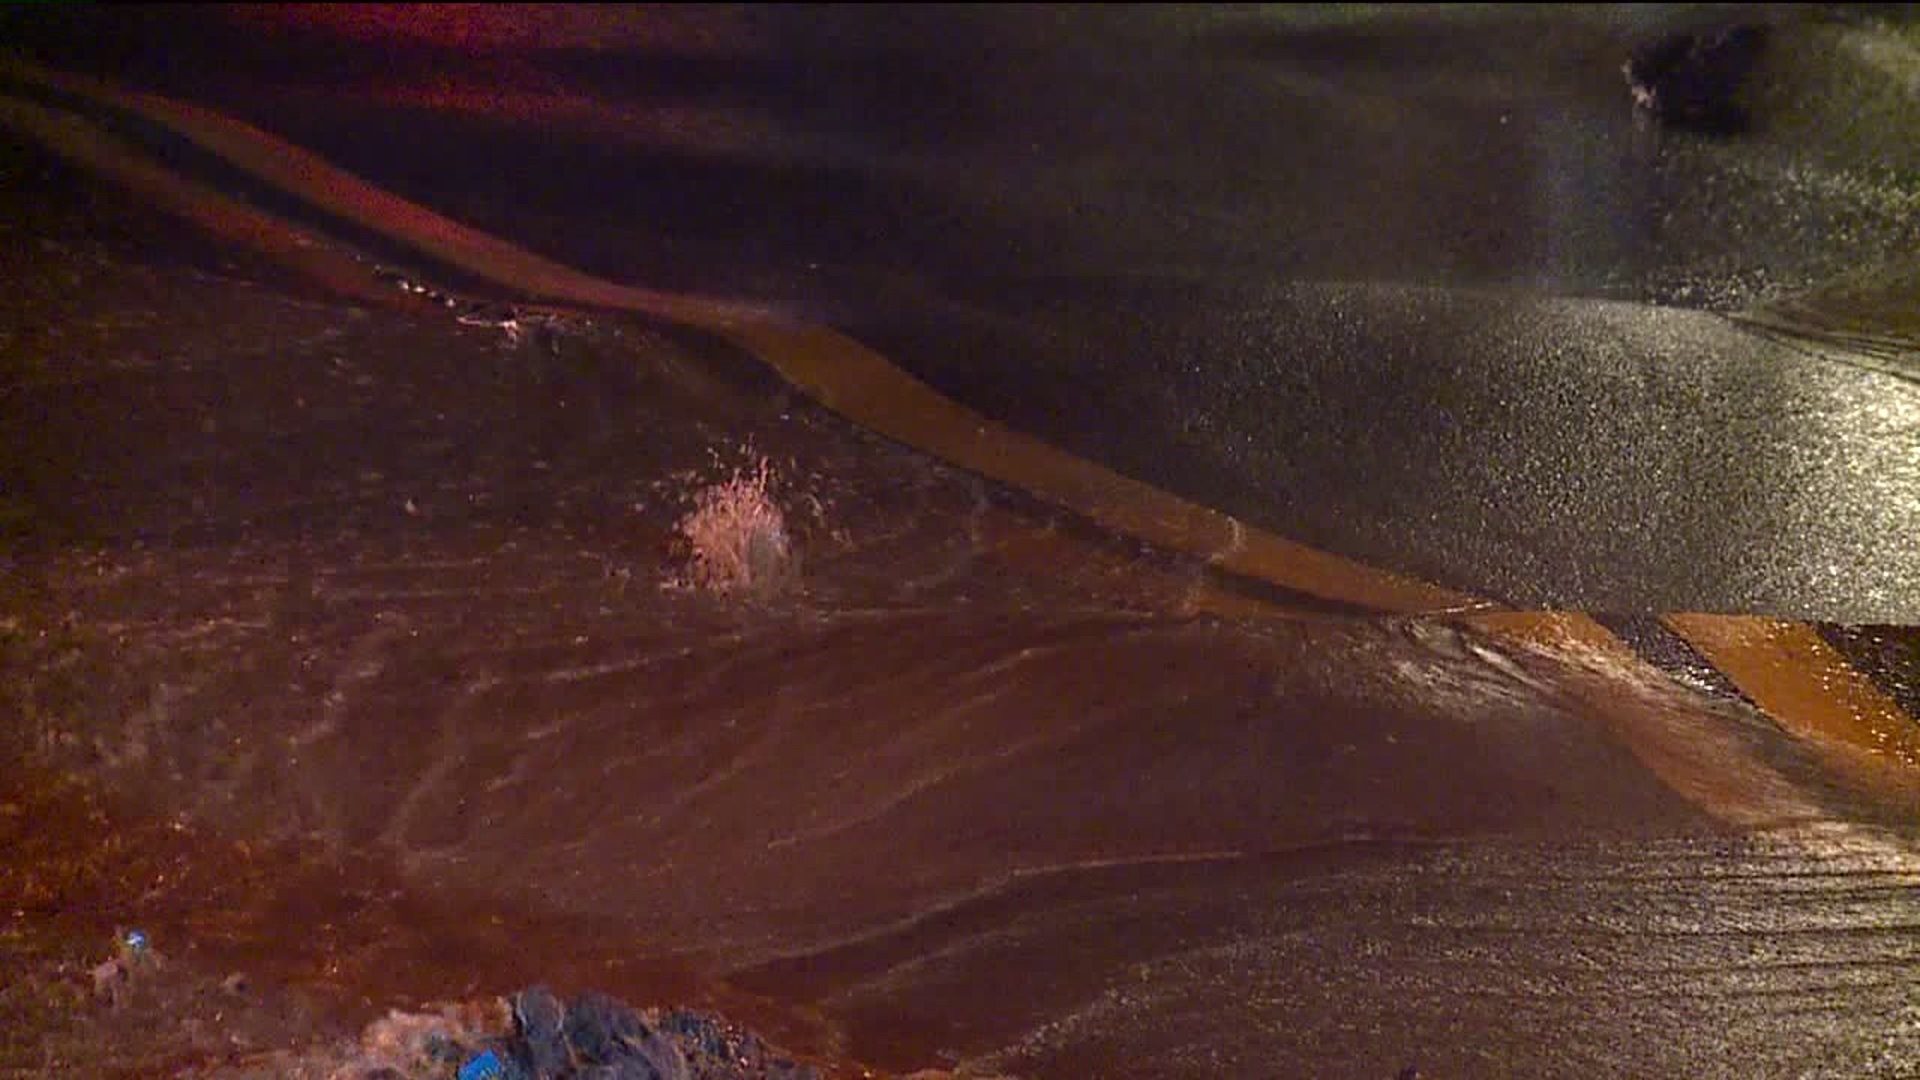 Water Gushes from Main Break, Buckles Road in Luzerne County